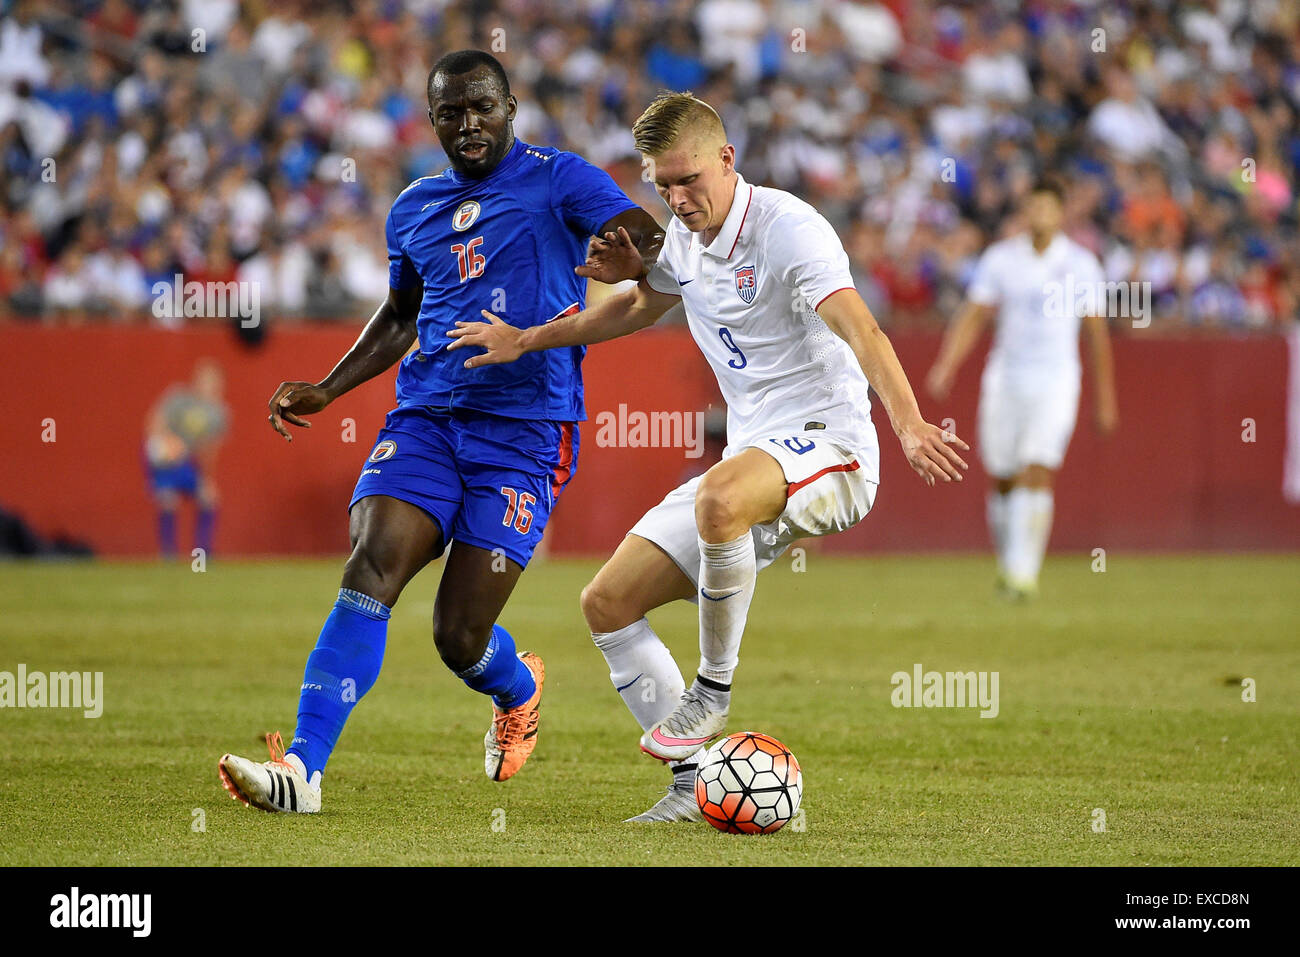 Foxborough, Massachusetts, USA. 10th July, 2015. United States forward Aron Johannsson (9) works to keep the b all from Haiti midfielder Jean-Marc Alexandre (16) during the CONCACAF Gold Cup group stage match between USA and Haiti held at Gillette Stadium, in Foxborough Massachusetts. USA defeated Haiti 1-0. Eric Canha/CSM/Alamy Live News Stock Photo